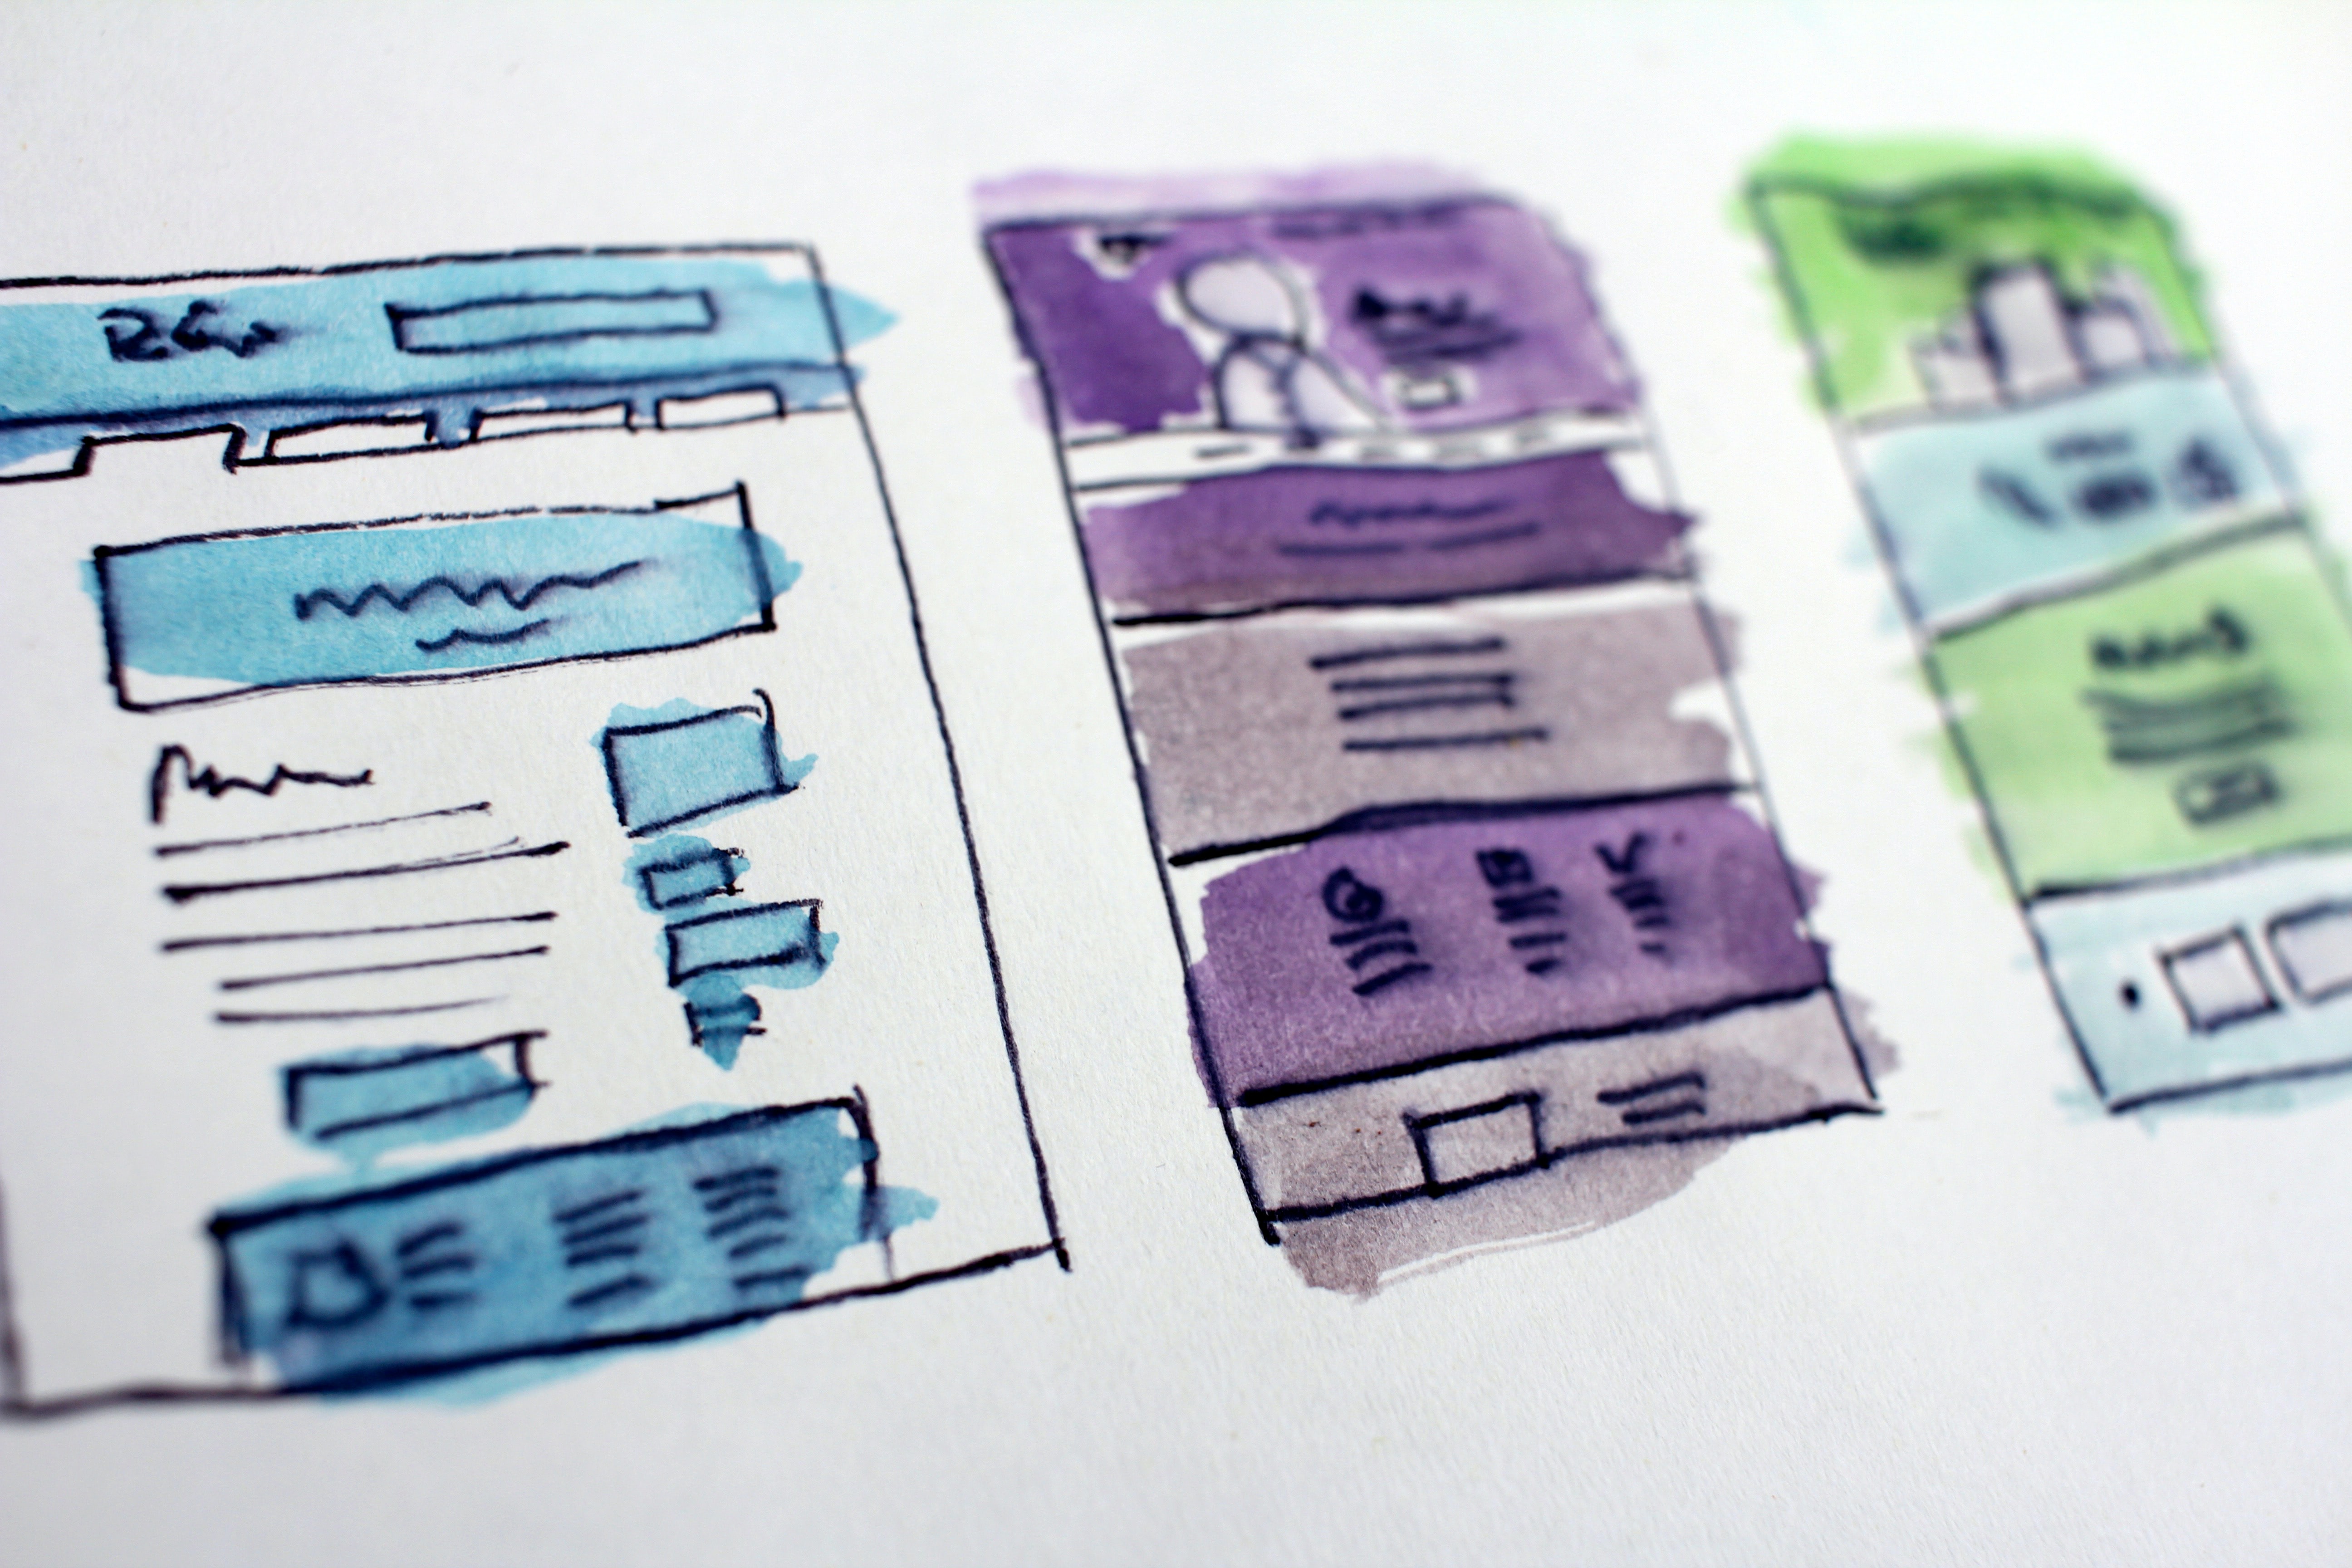 Image shows a sketch of a website, hand-drawn, with different coloured blocks